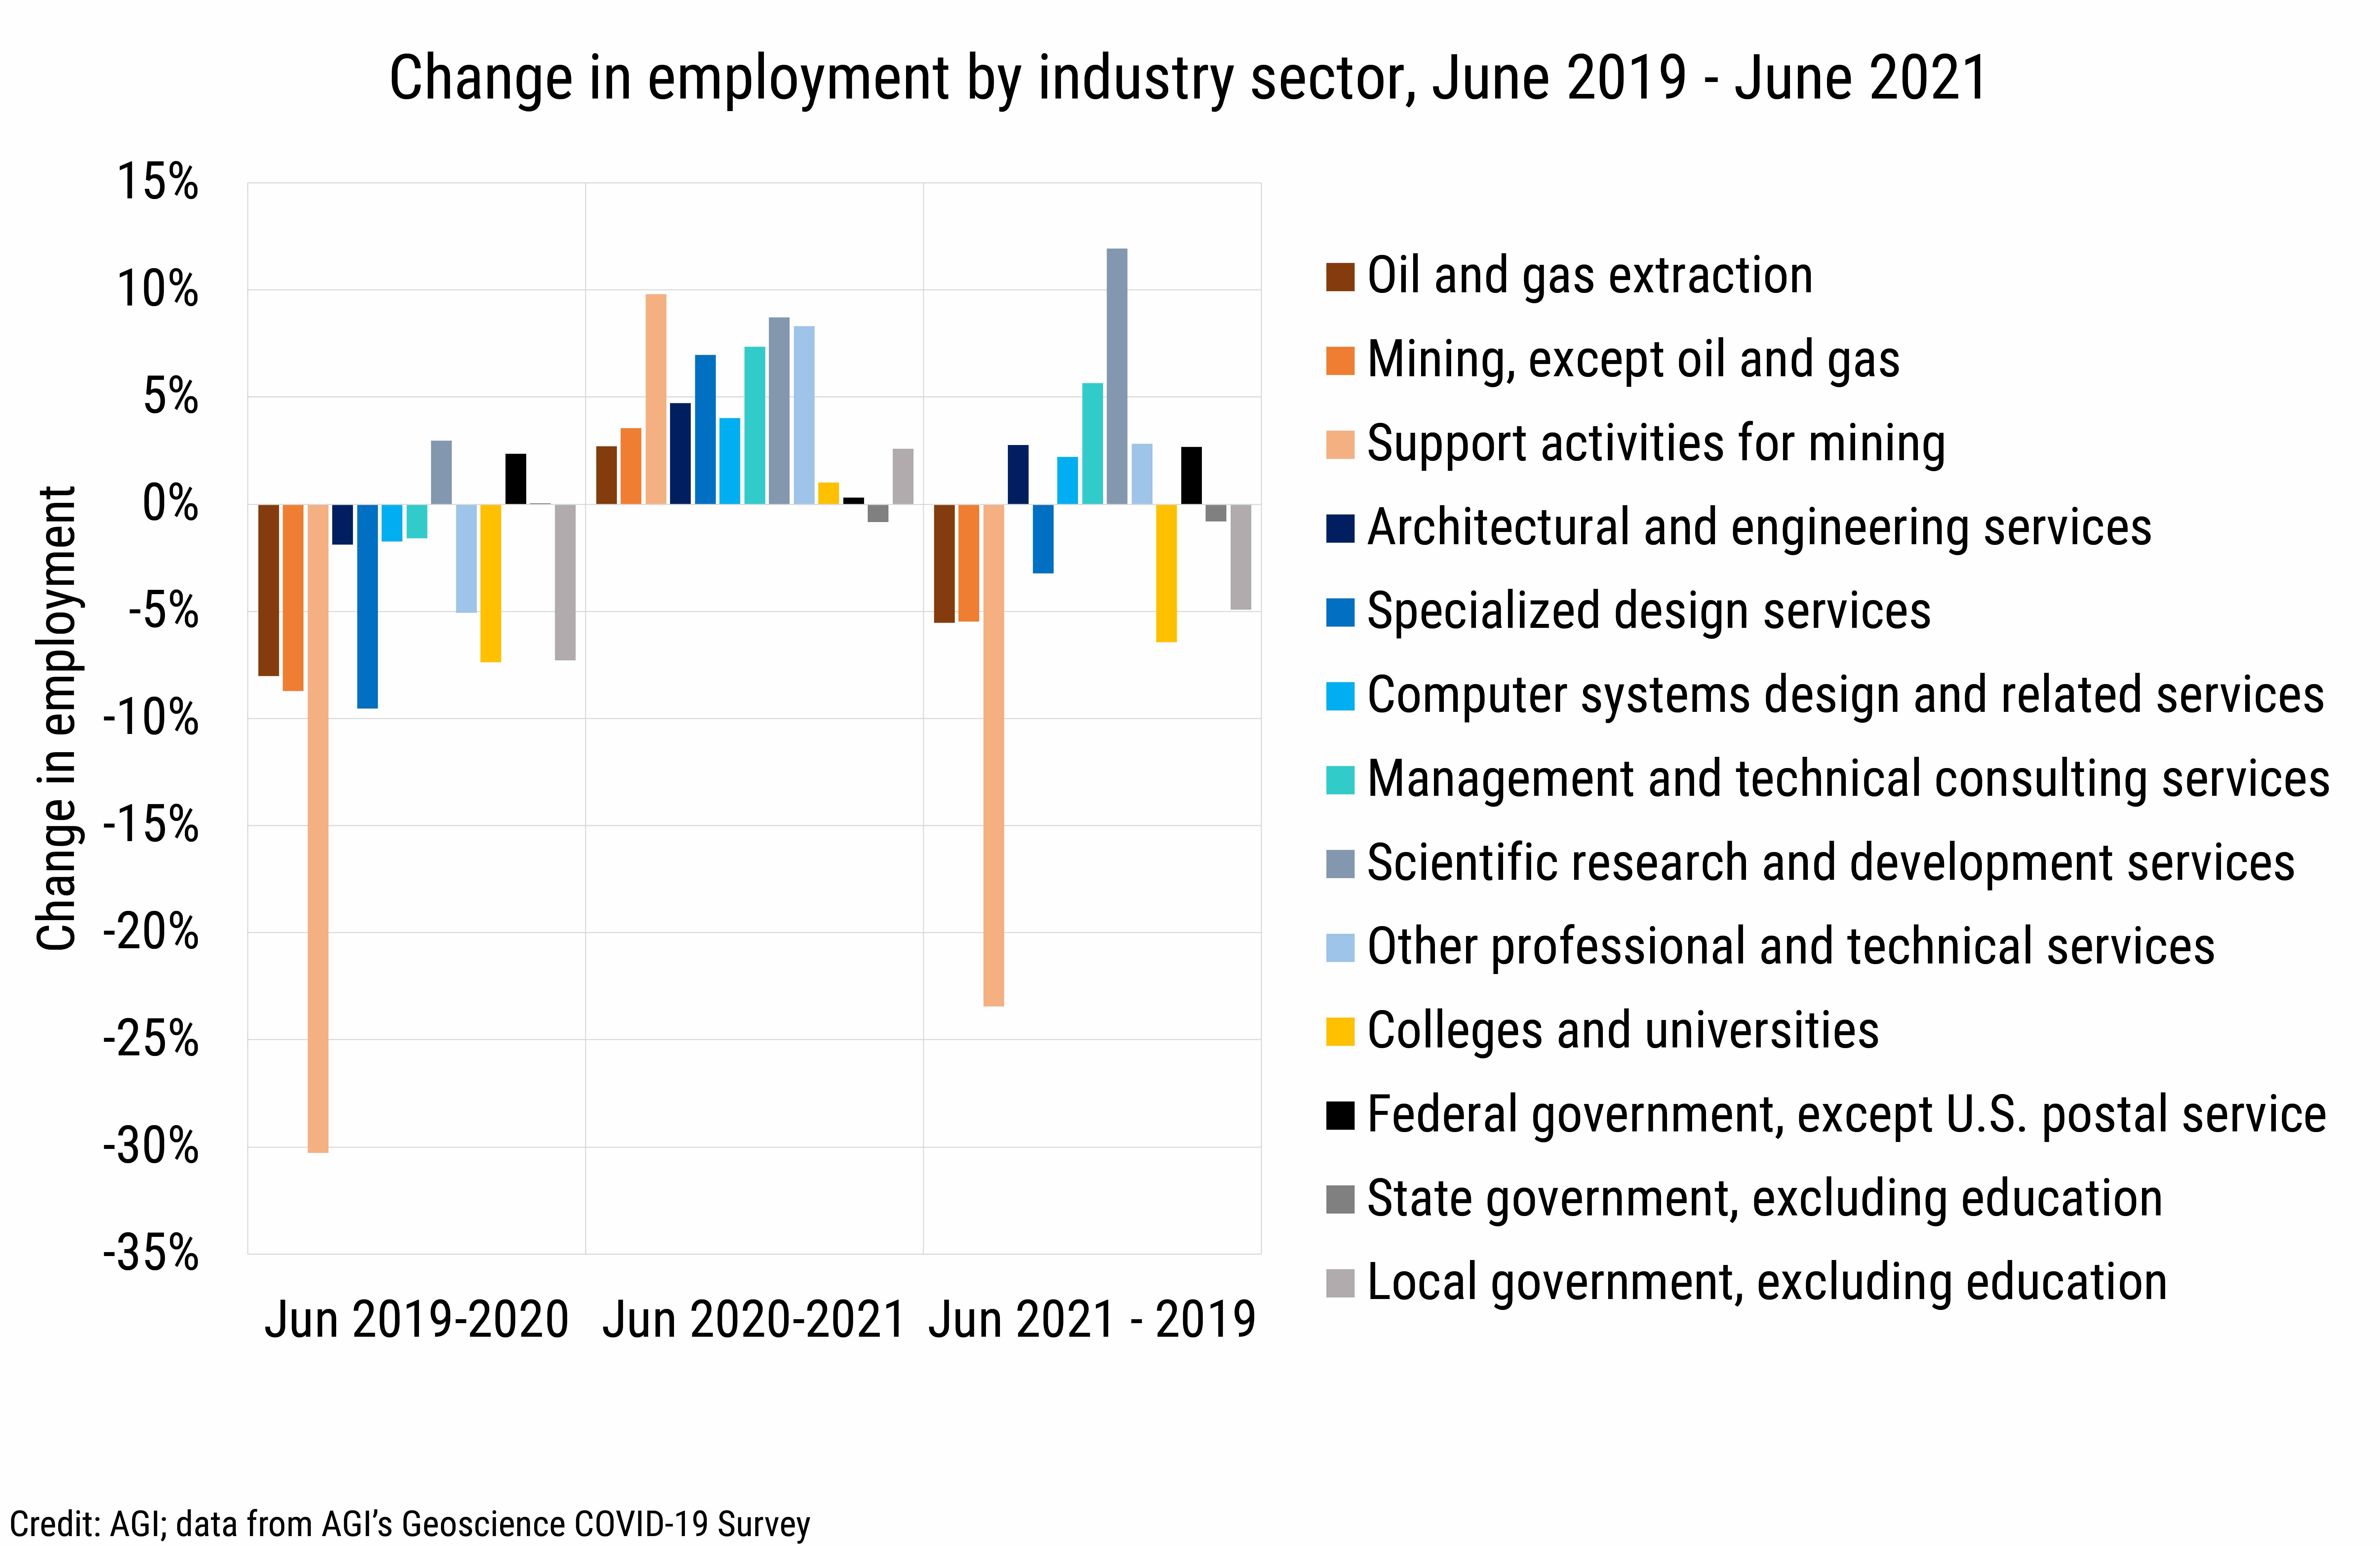 DB_2021-023 chart 04: Change in employment by industry sector, June 2019 - June 2021  (Credit: AGI, data derived from the U.S. Bureau of Labor Statistics, Current Employment Statistics)